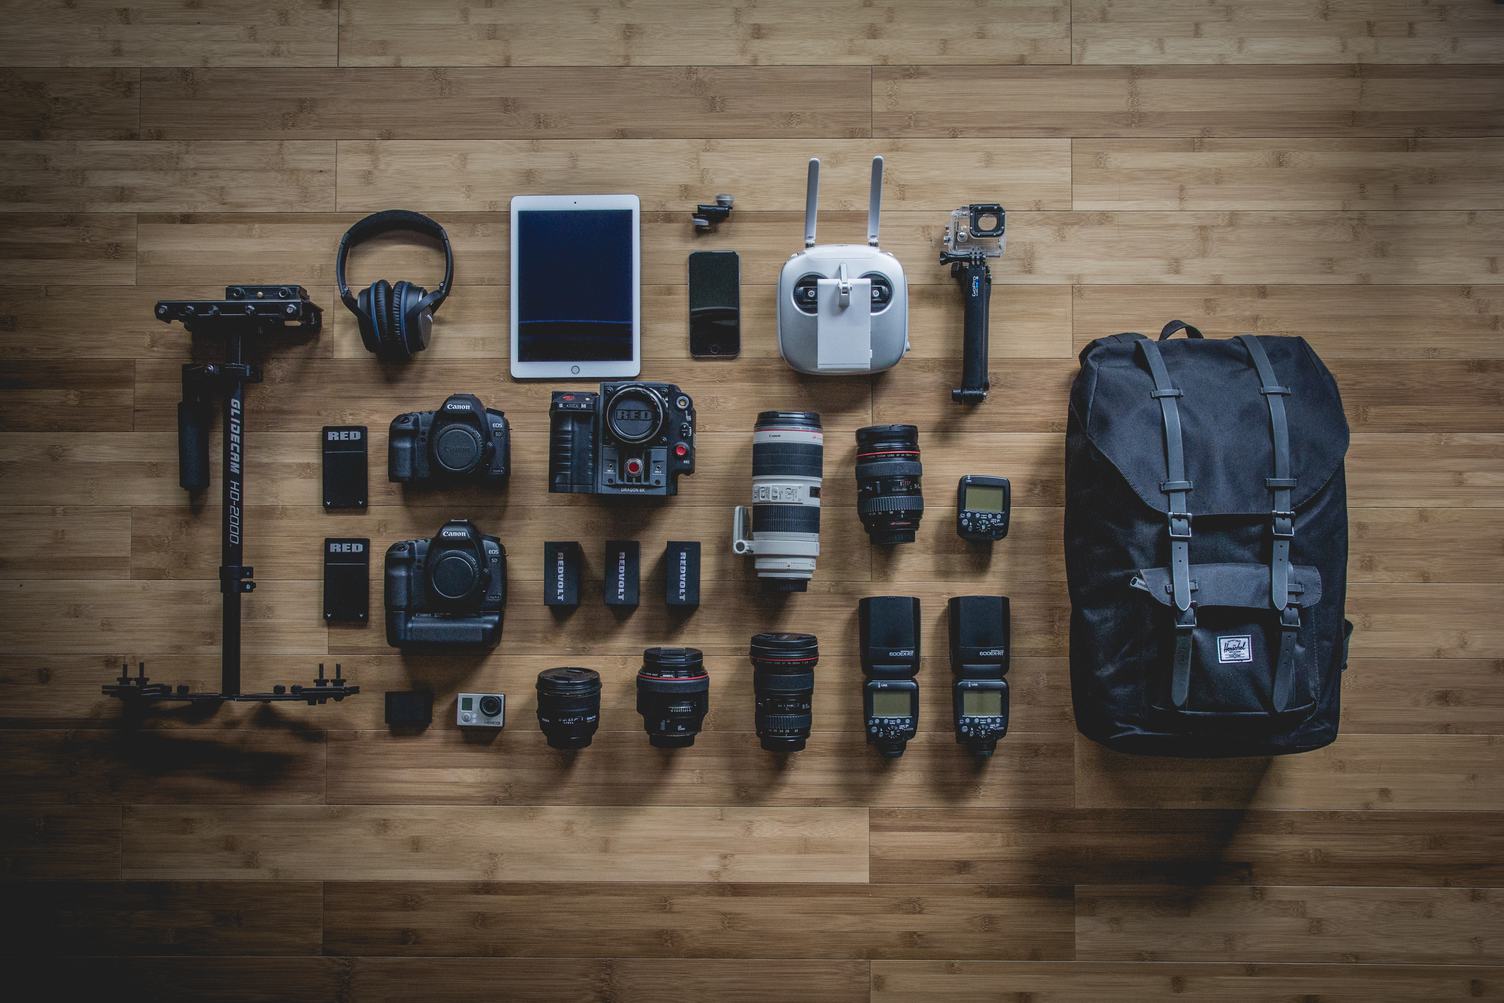 Diverse Personal Photographer Equipment Laying on the Wooden Floor